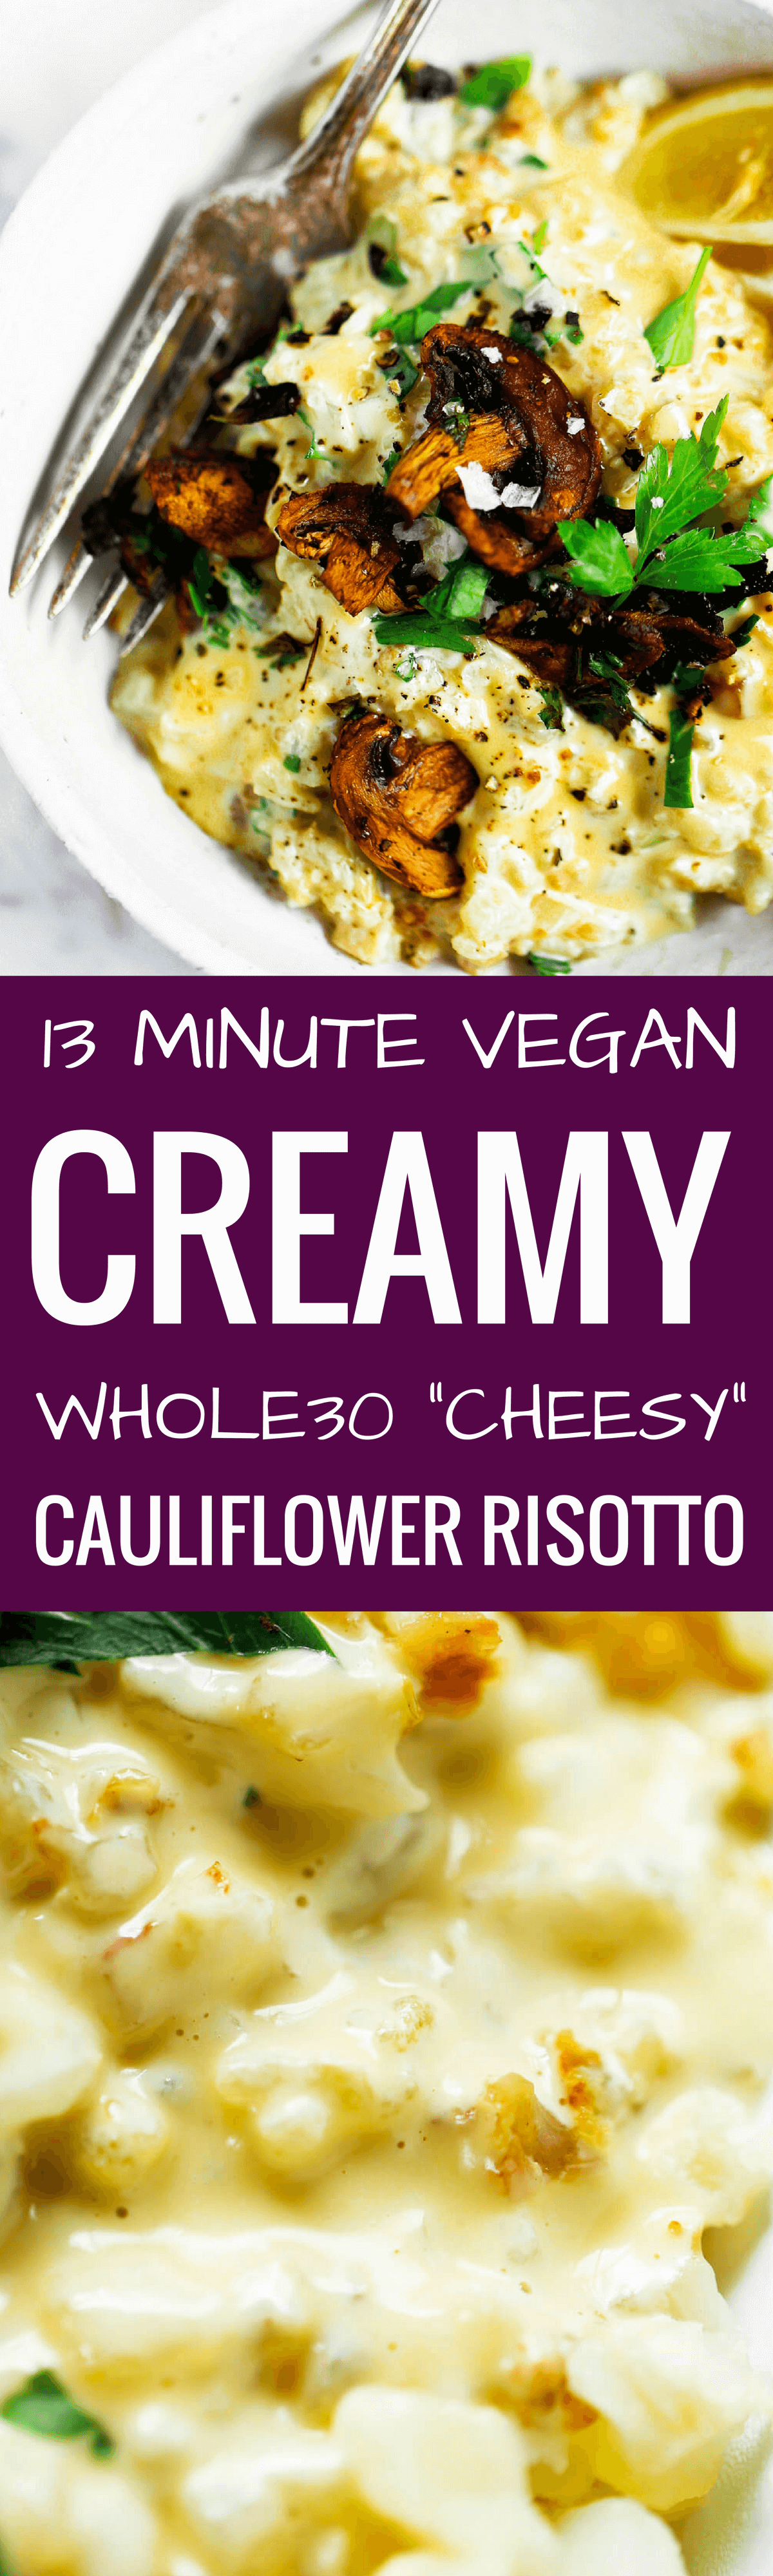 This recipe for whole30 “cheesy” risotto will leave you wanting more! Healthy whole30 and paleo creamy cauliflower risotto